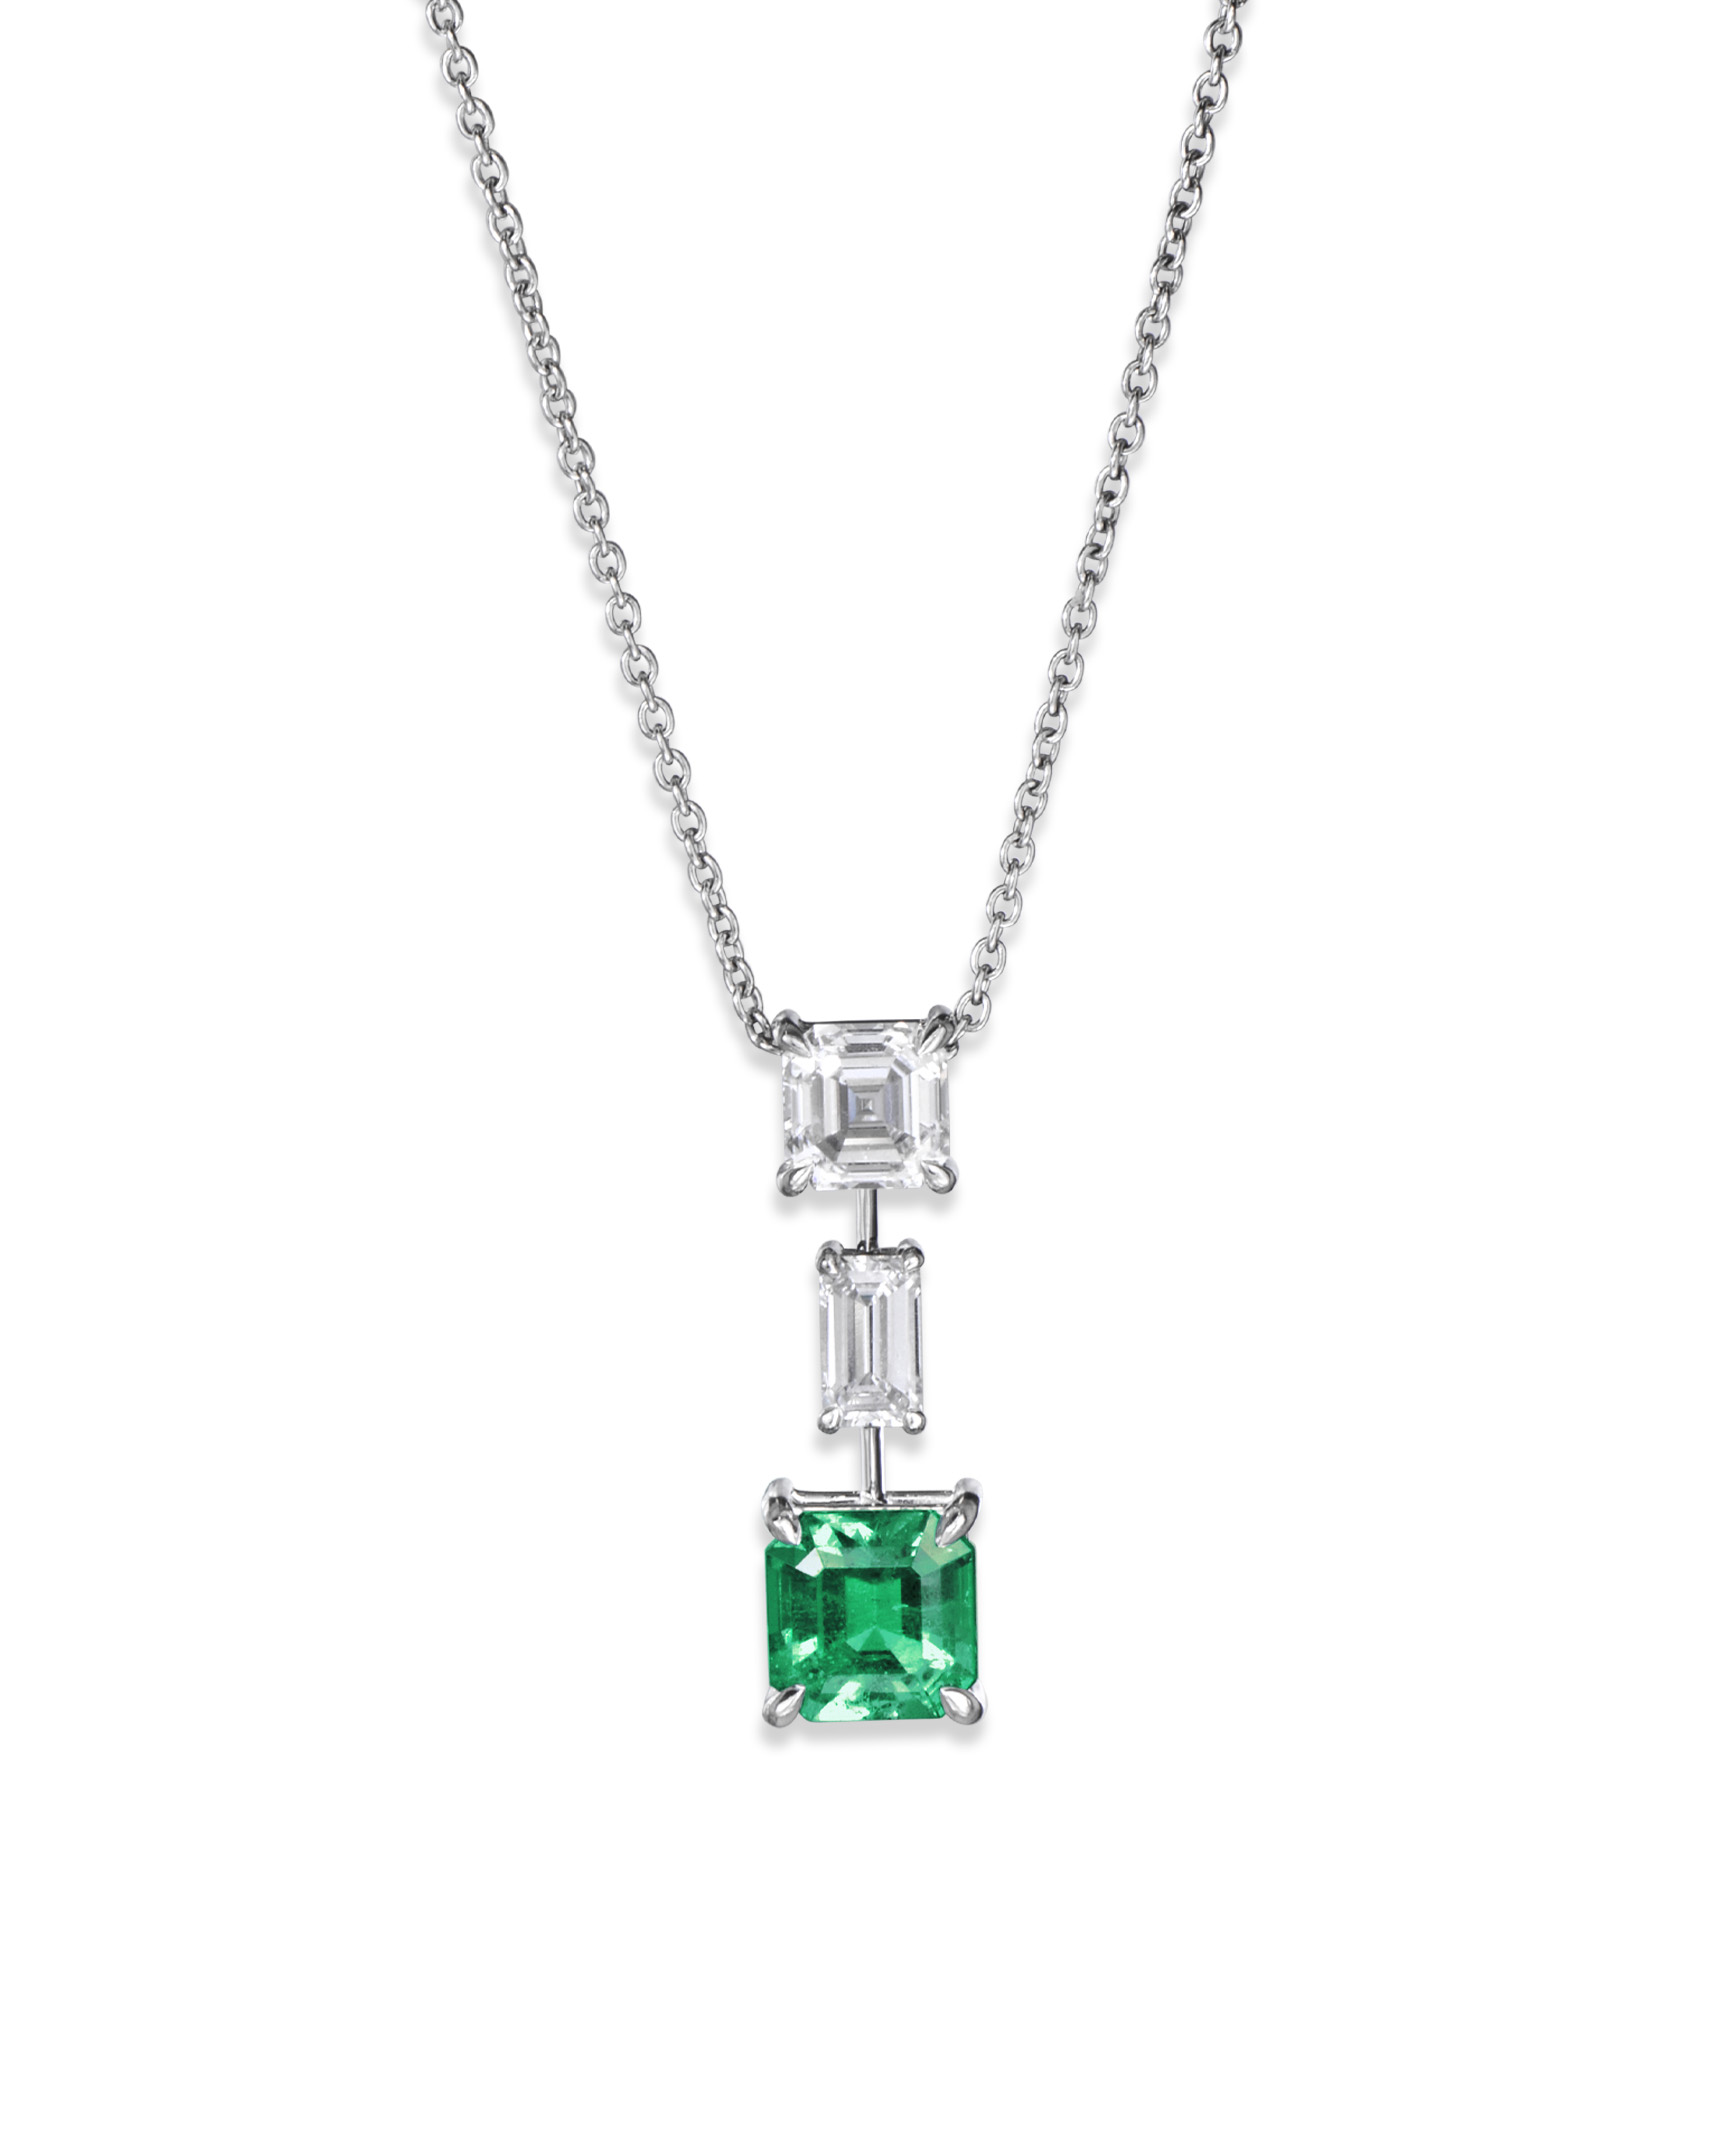 Exquisite 15.34 Carat Colombian Emerald Necklace - 18K Gold Luxury Setting